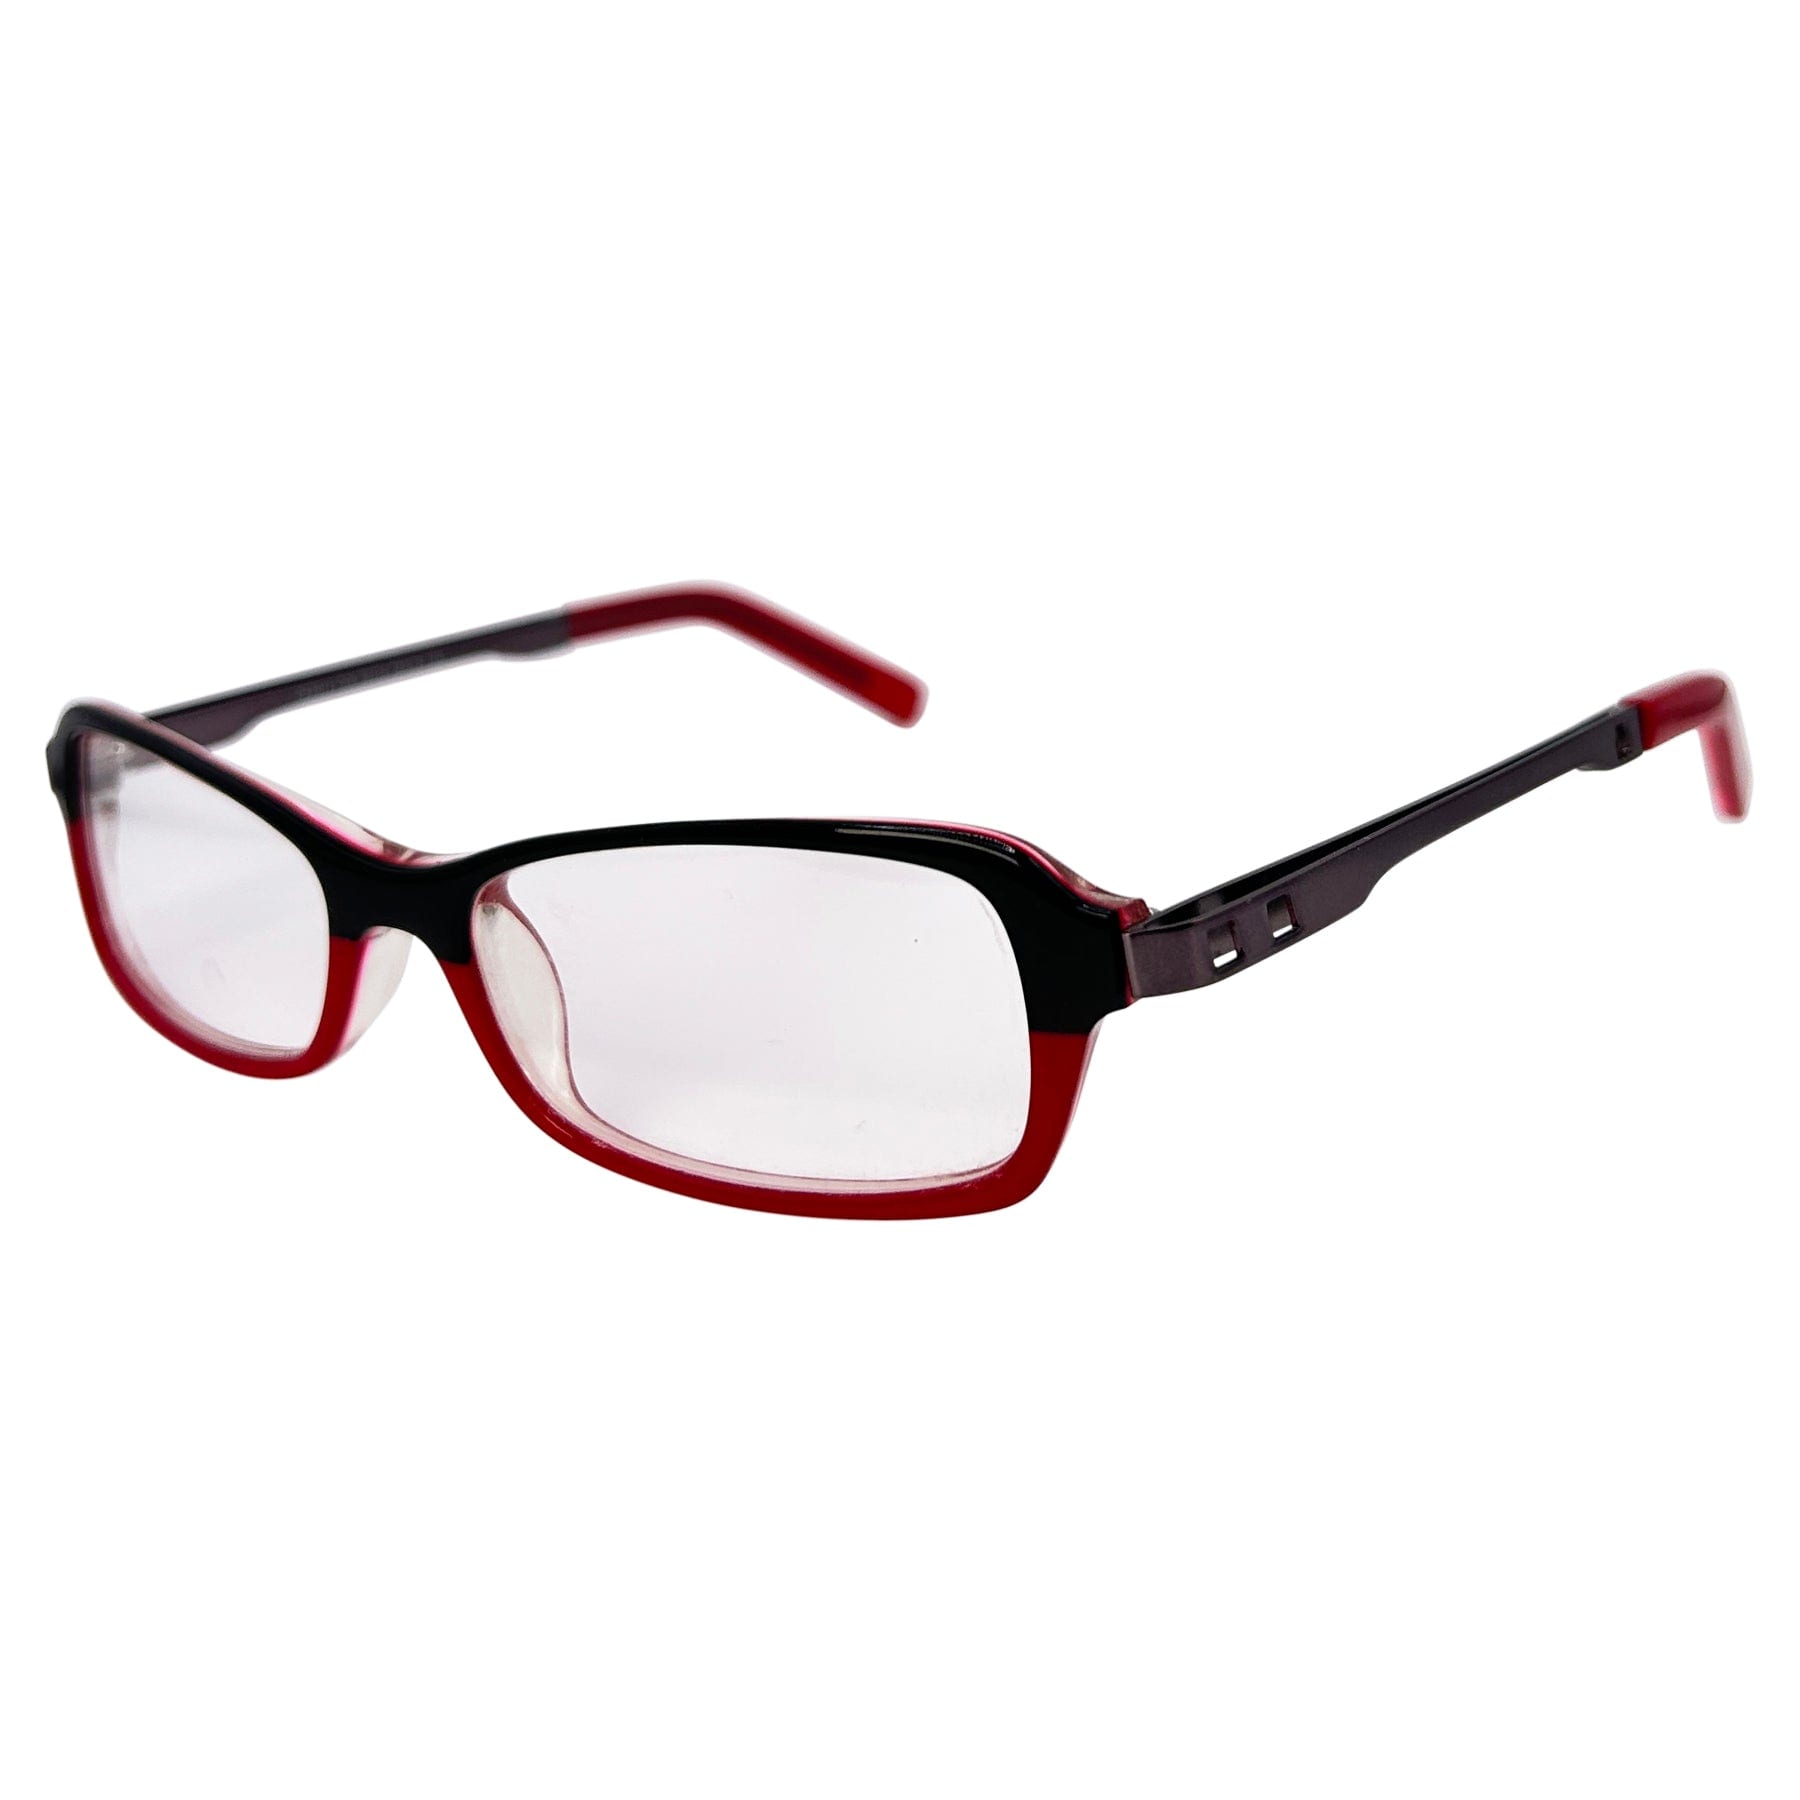 90s vintage look with a black and red square style frame